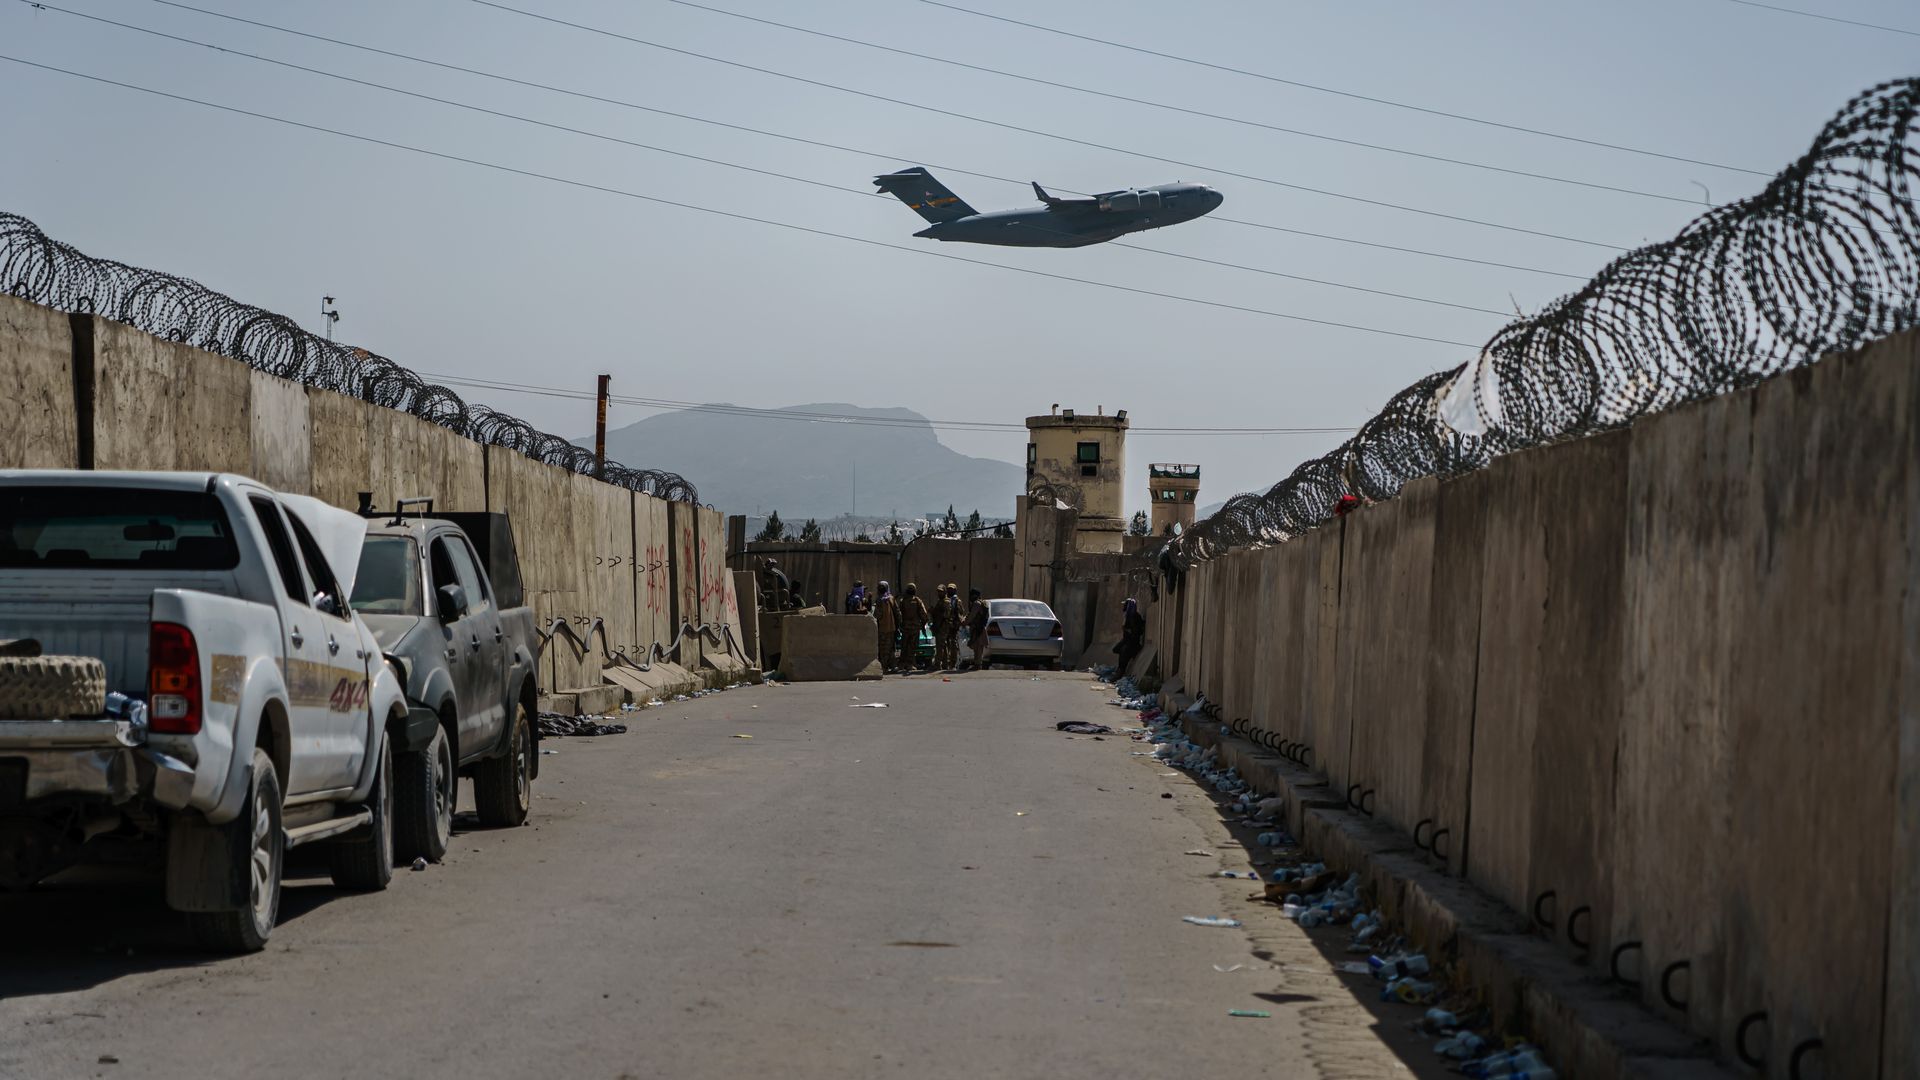 A C-17 Globemaster takes off from Kabul.